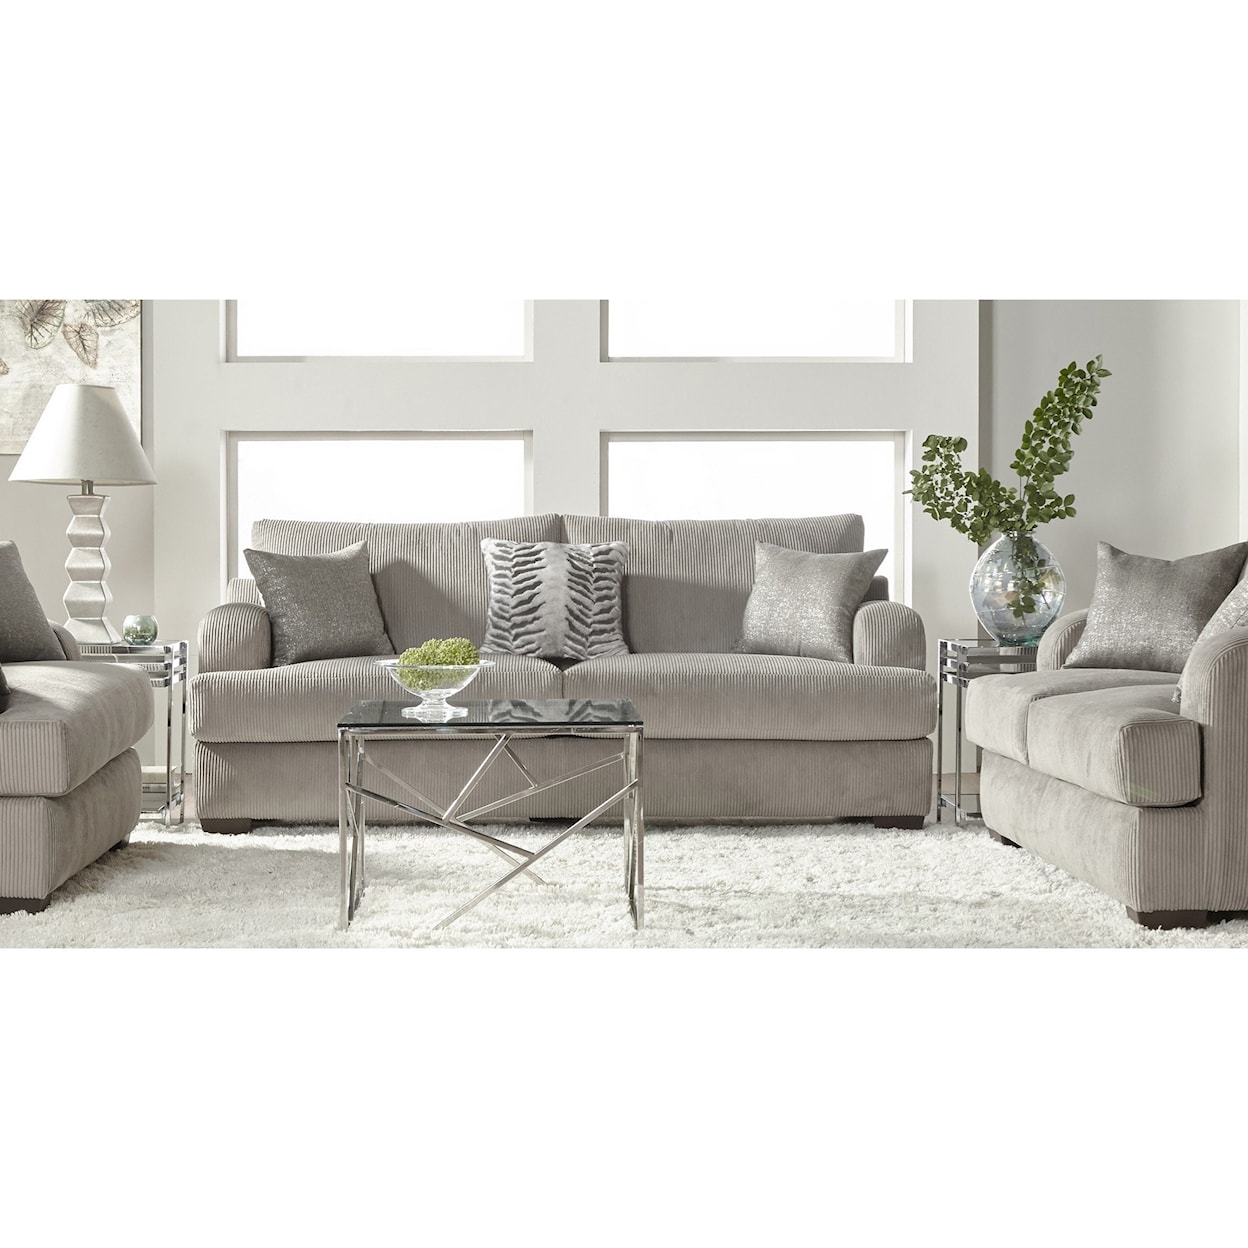 Serta Upholstery by Hughes Furniture 14100 Stationary Living Room Group